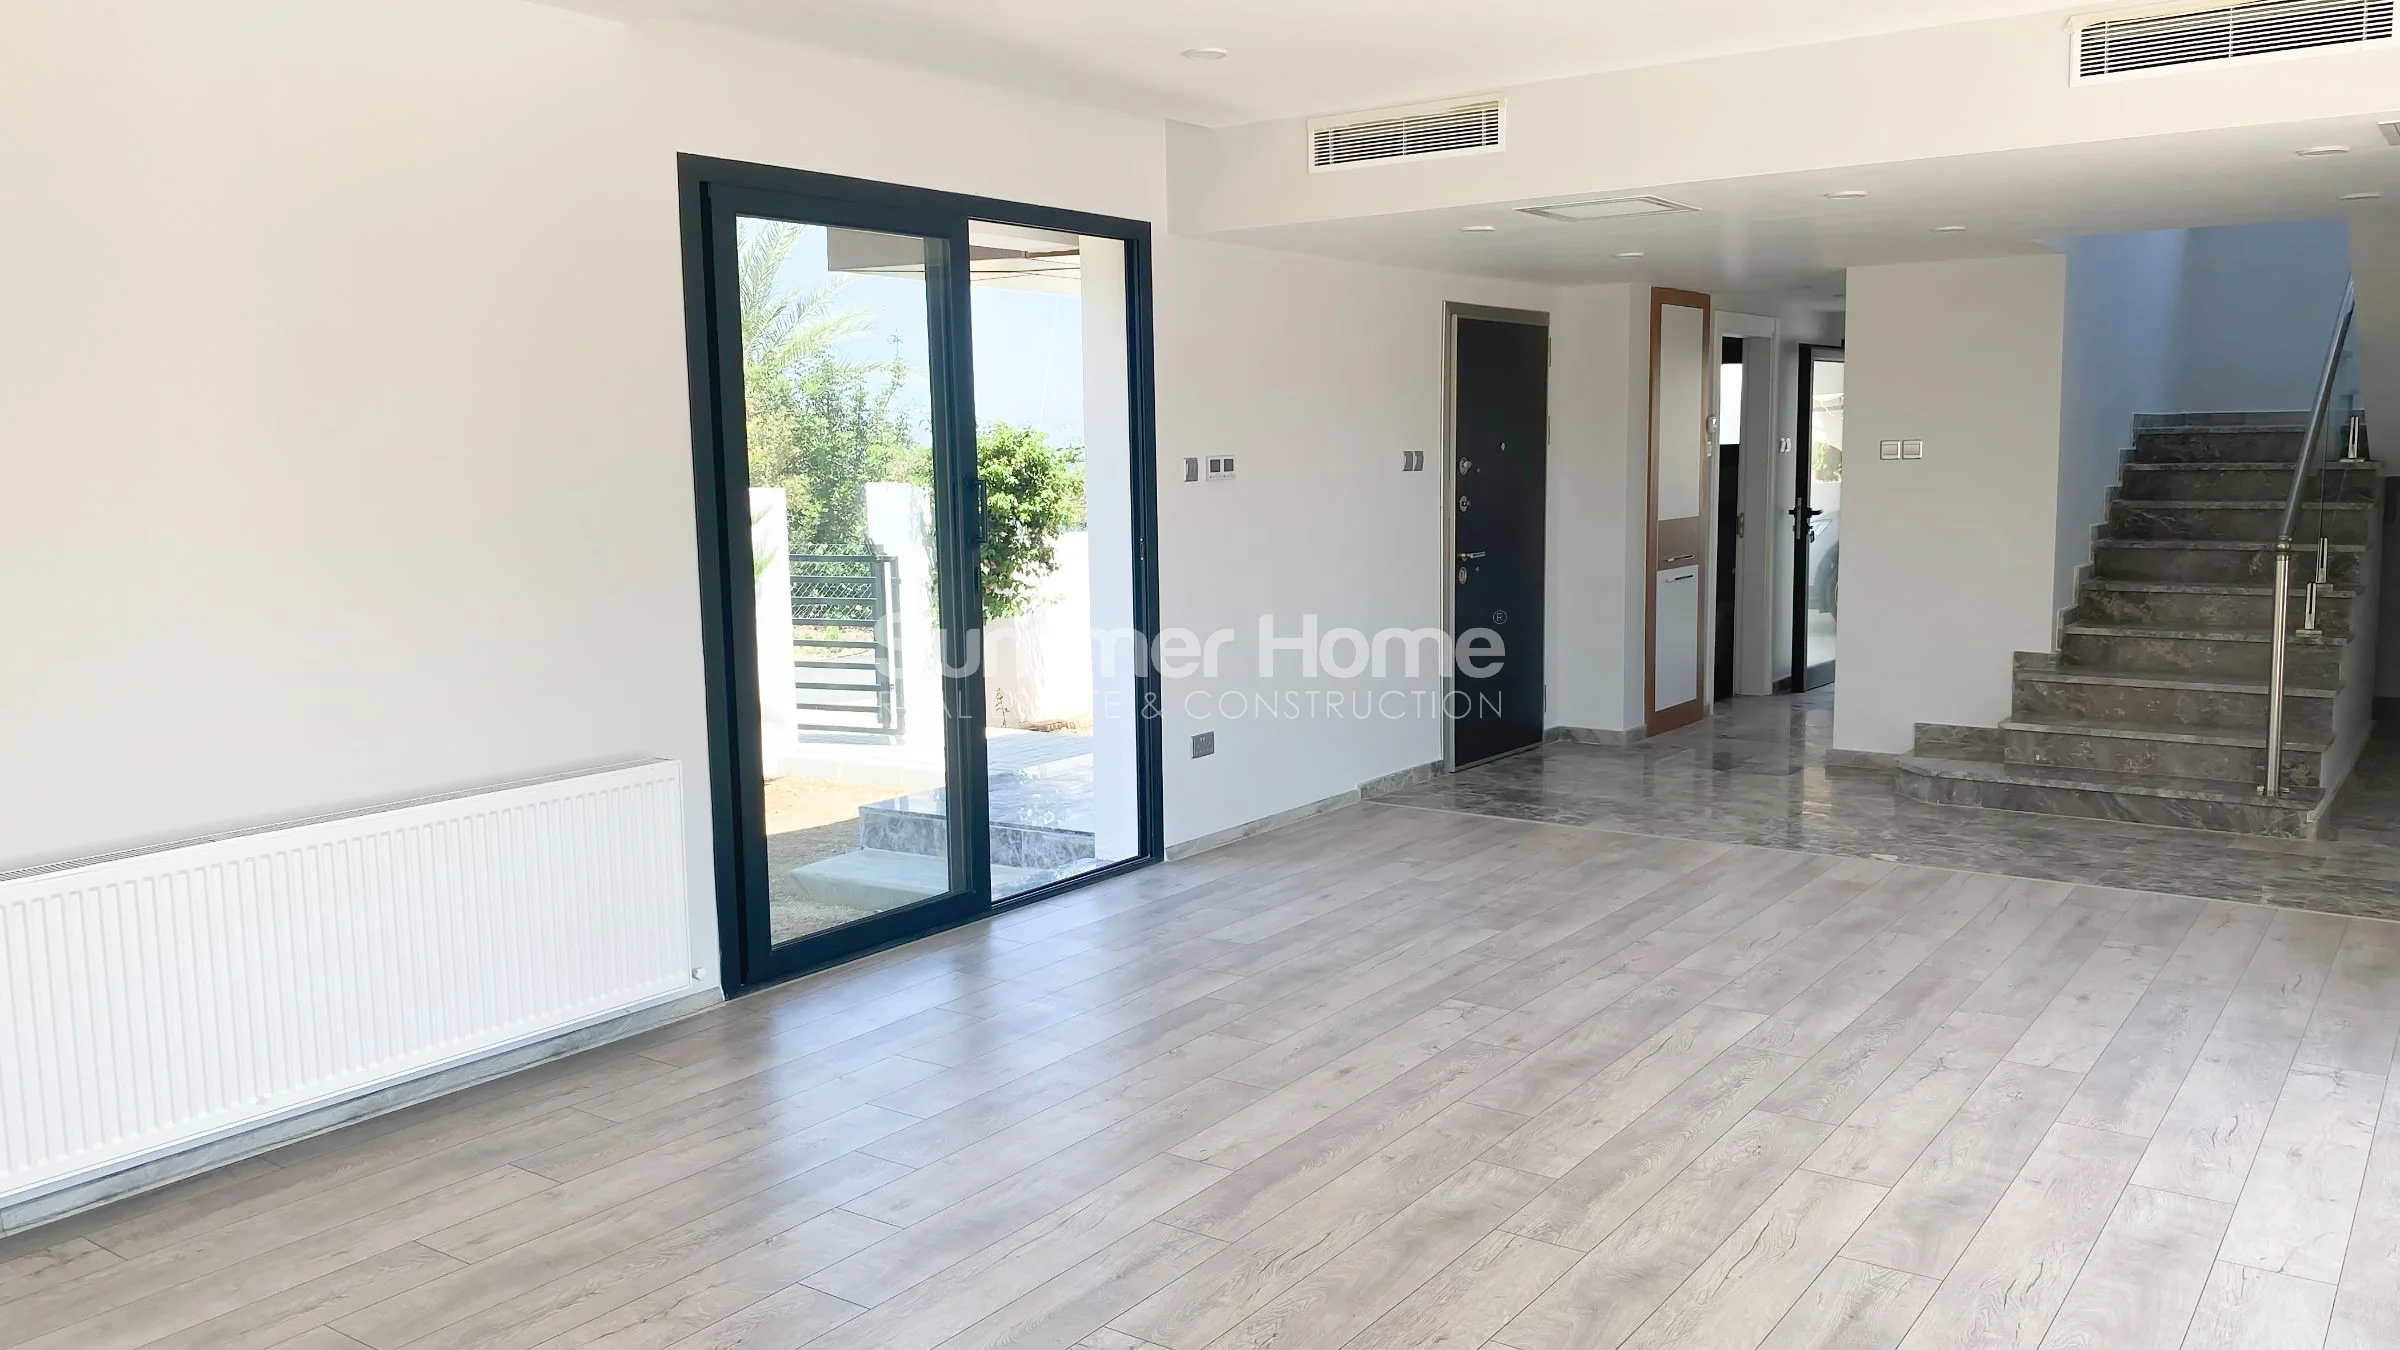 Recently completed well-located villas in Kyrenia, Cyprus Interior - 11